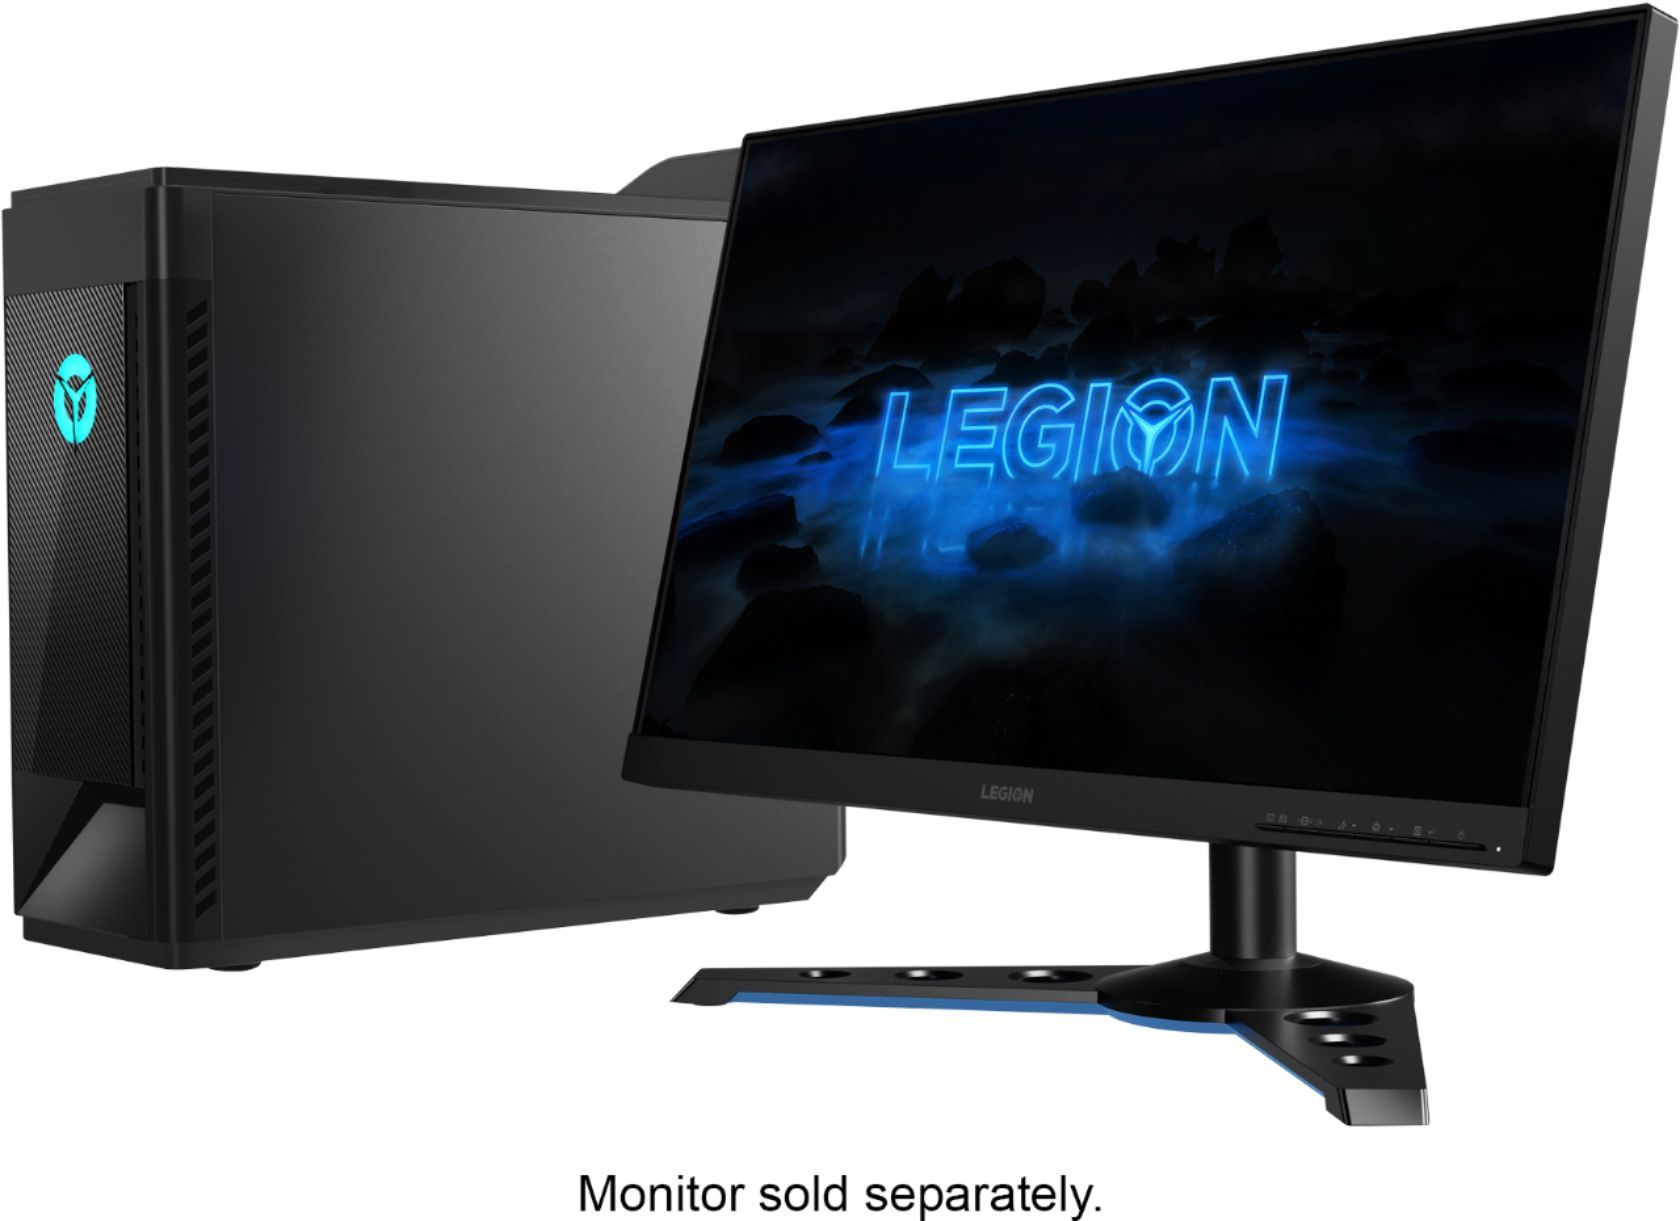 legion tower next to monitor